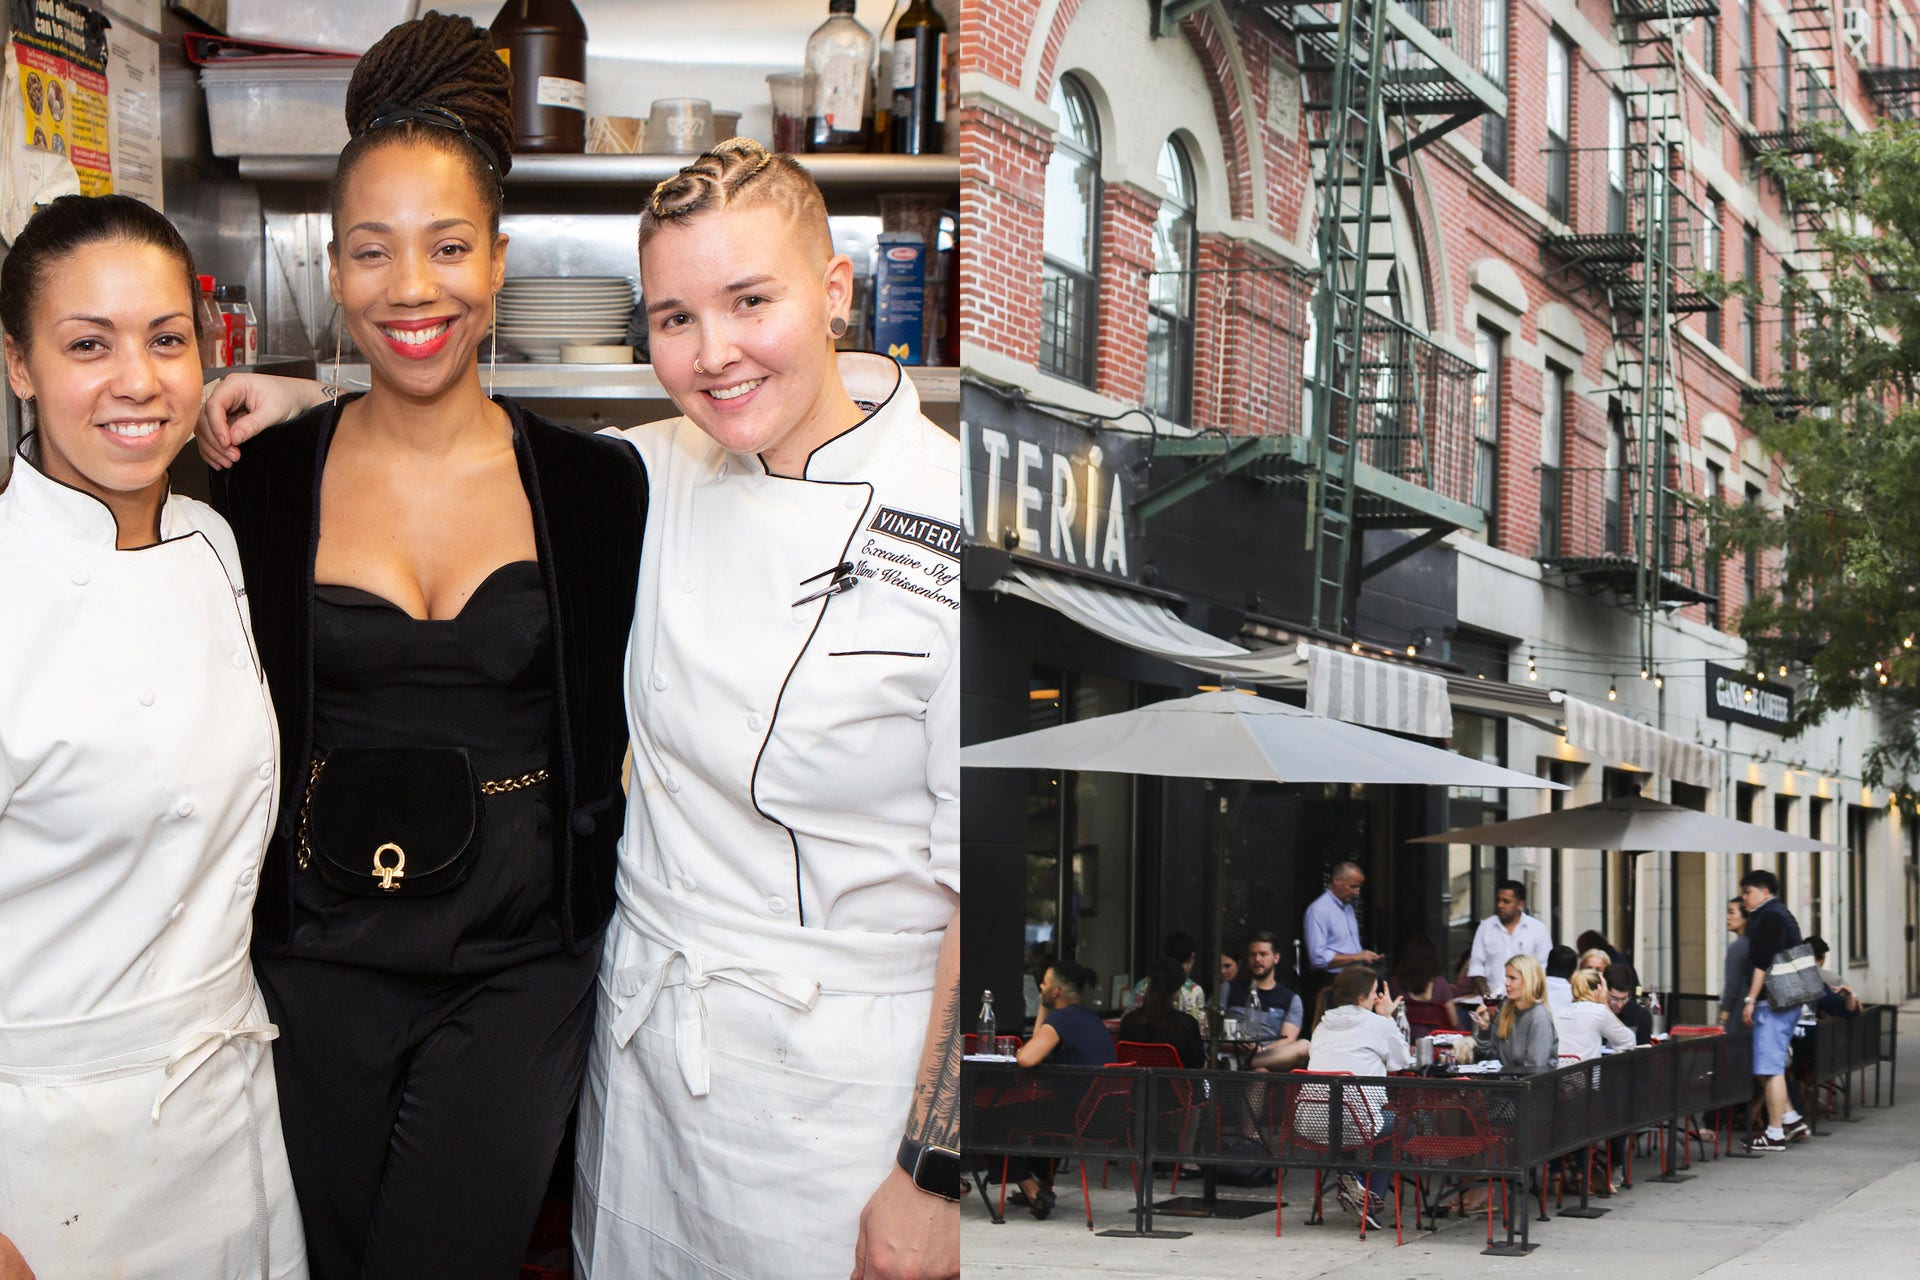 Left photo is three women, two in chefs whites, right photo is exterior of a restaurant with sidewalk seating 